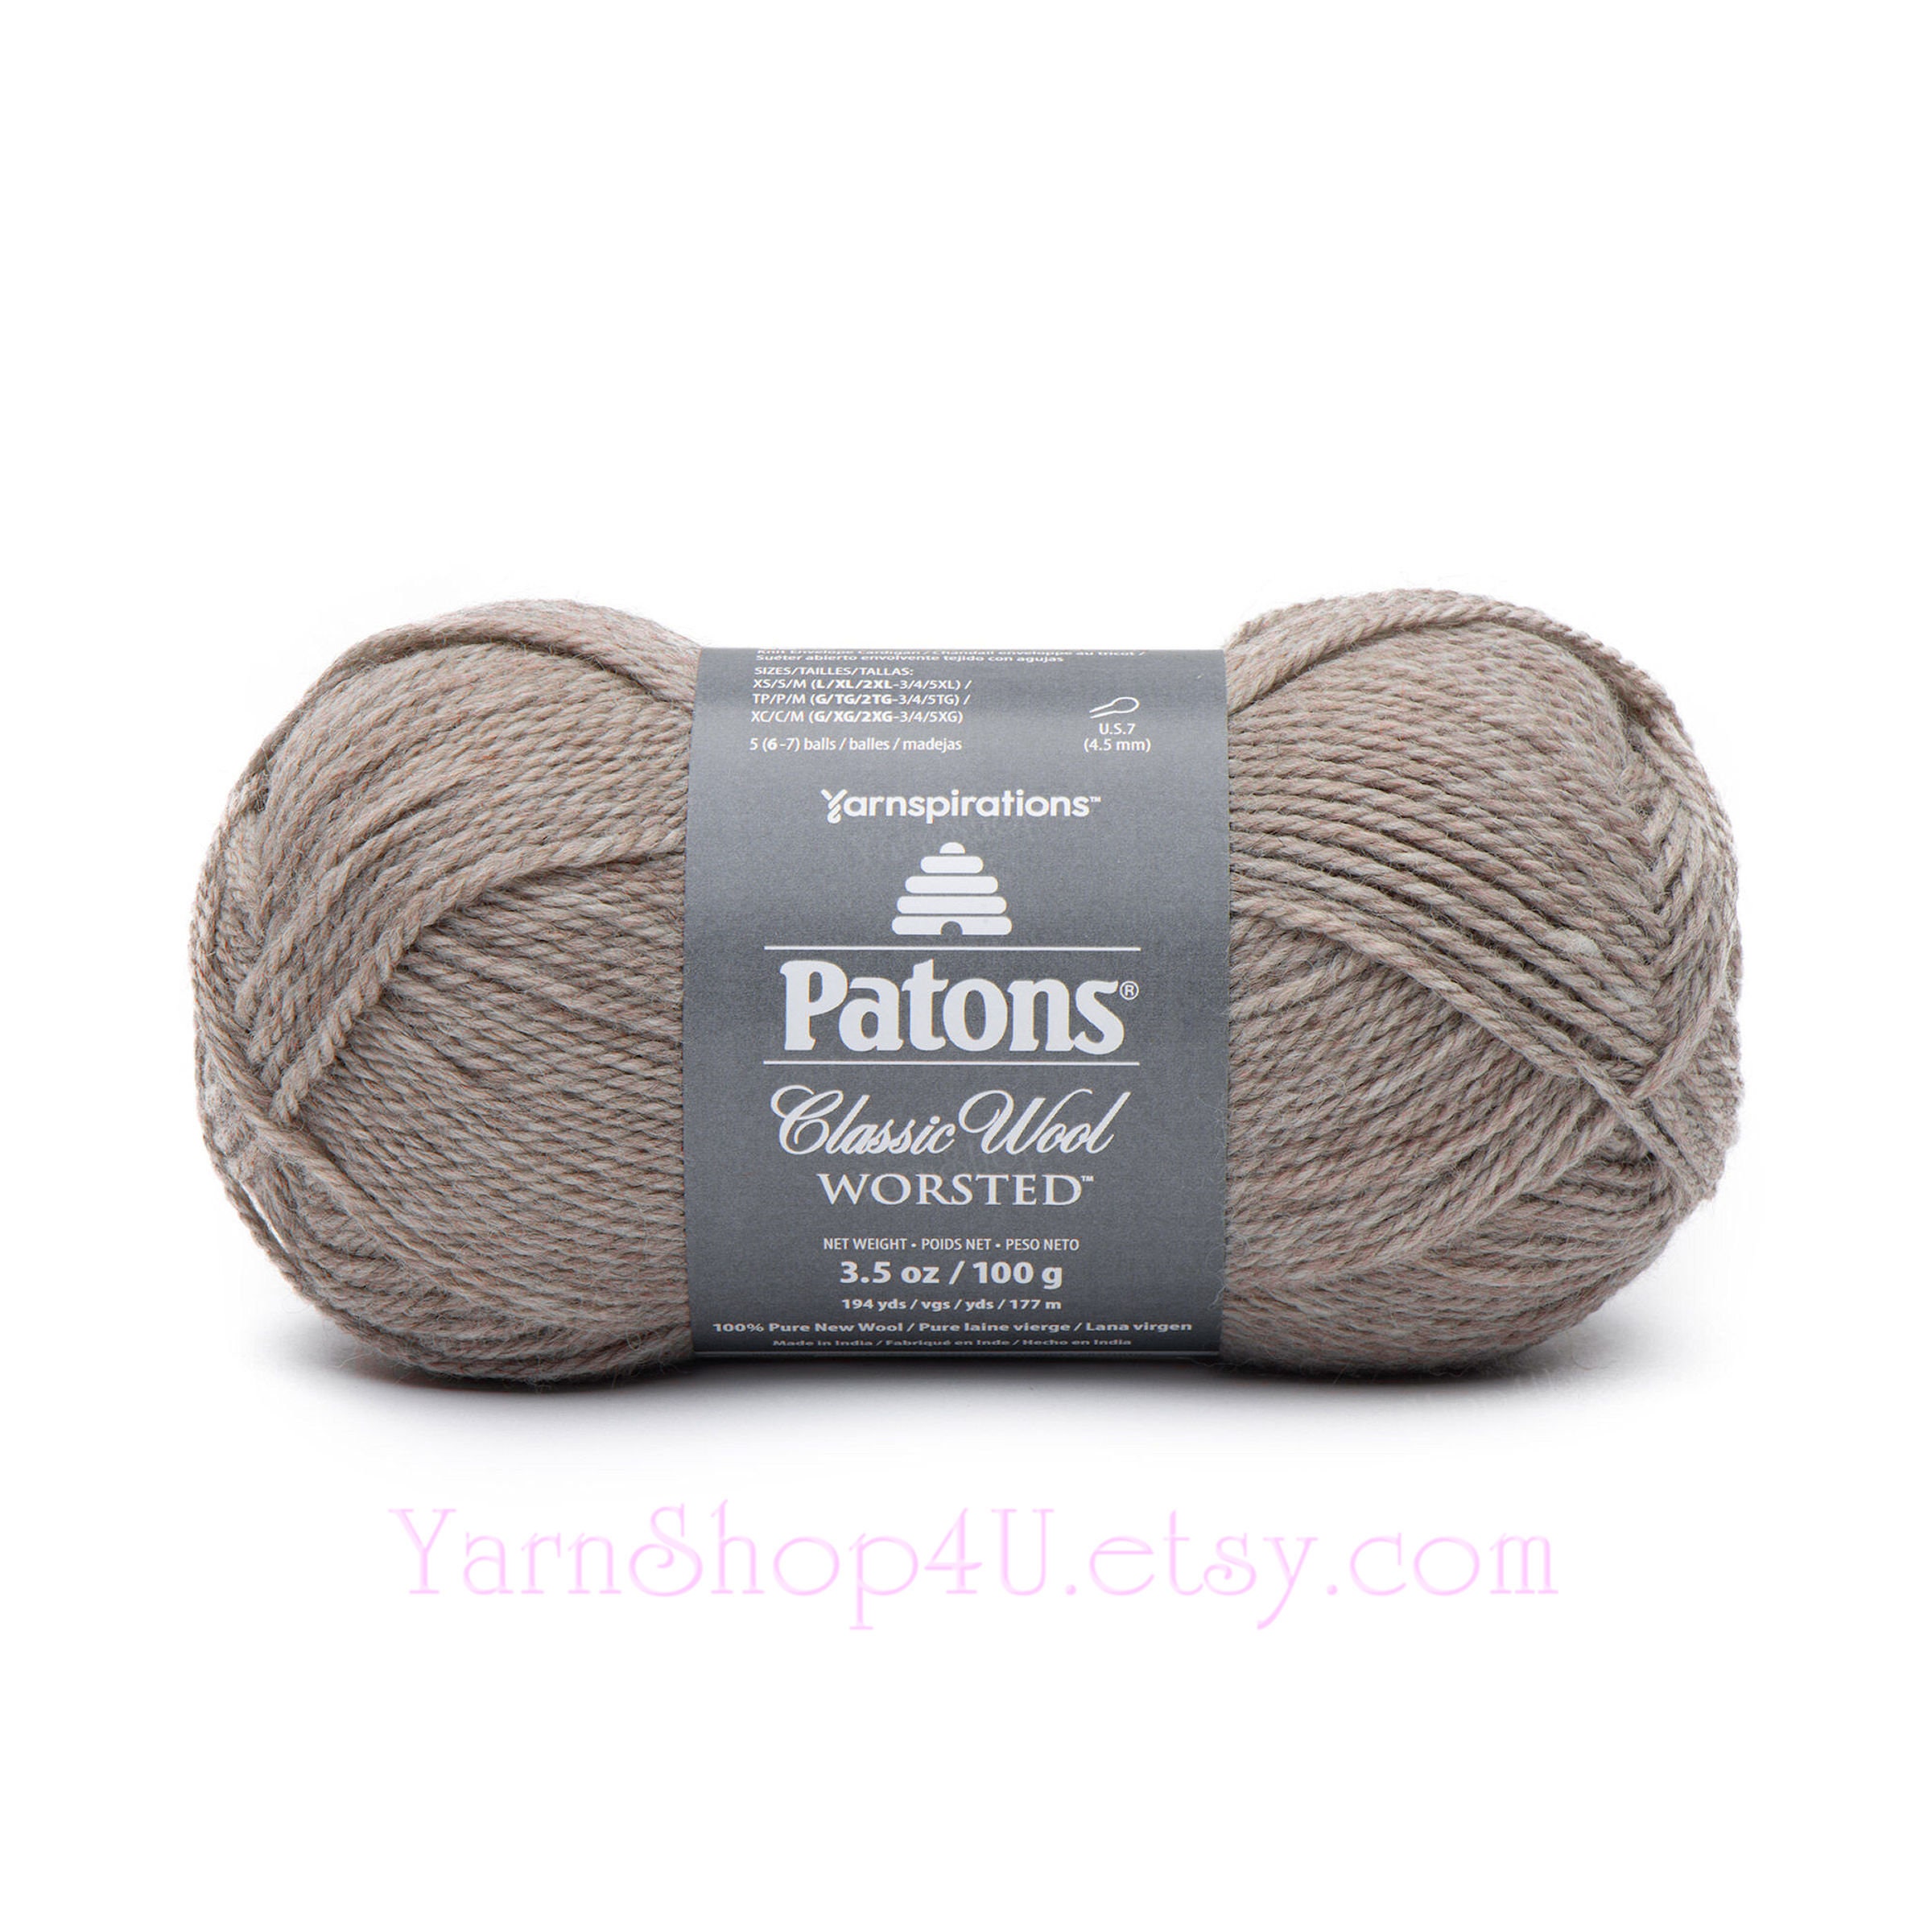 Natural Mix Worsted Weight Patons Classic Wool Medium Weight 4 100